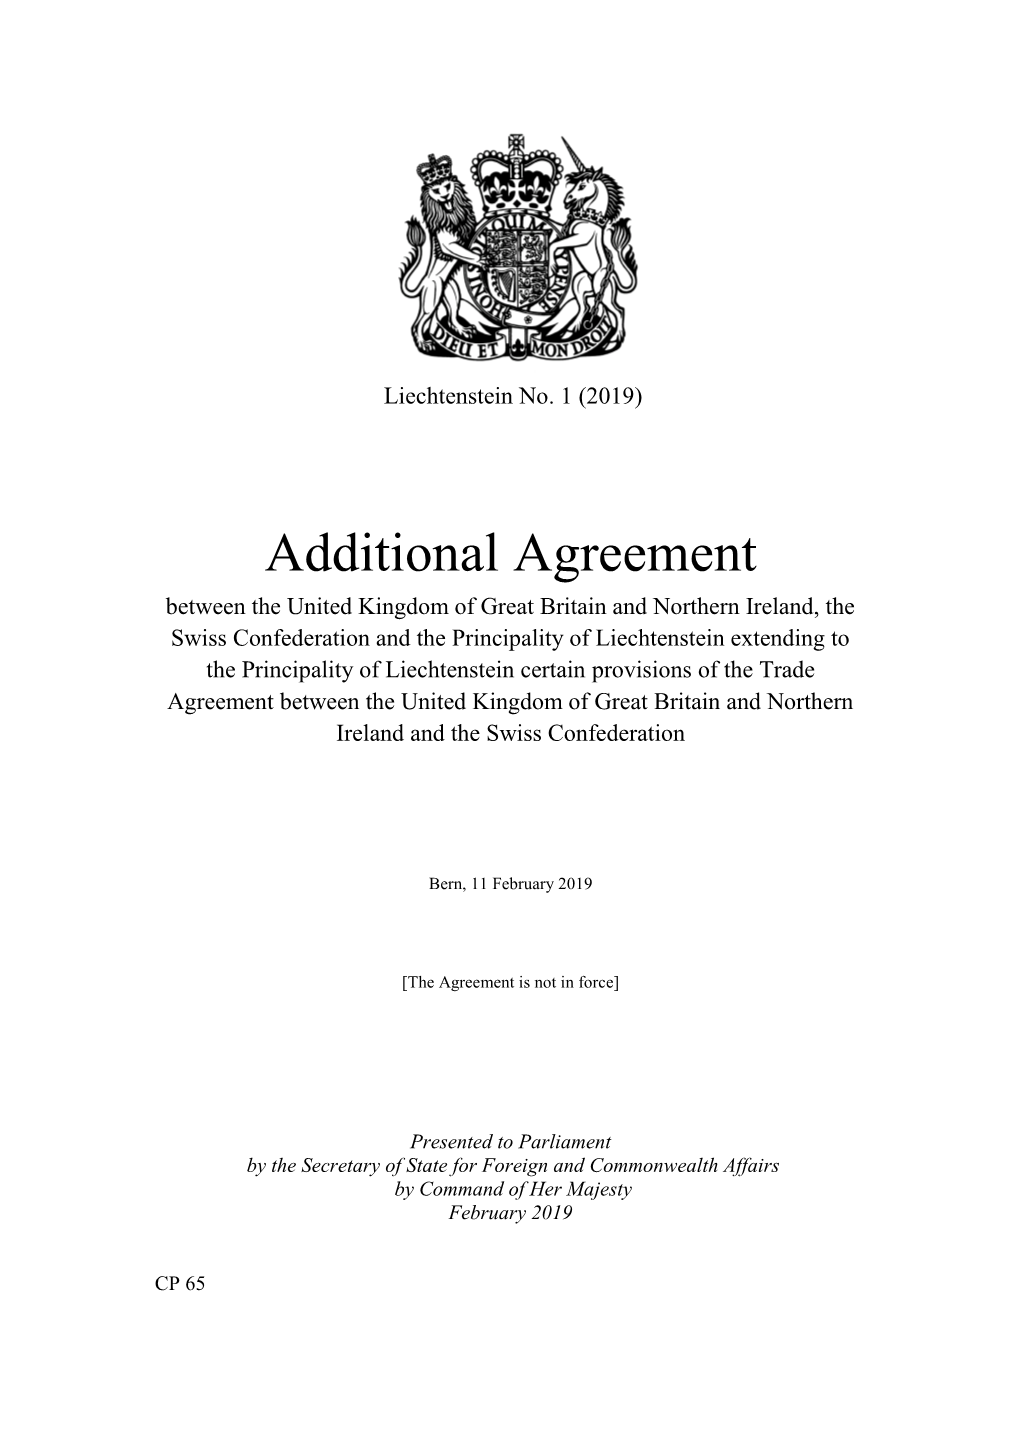 Additional Agreement Between the United Kingdom of Great Britain